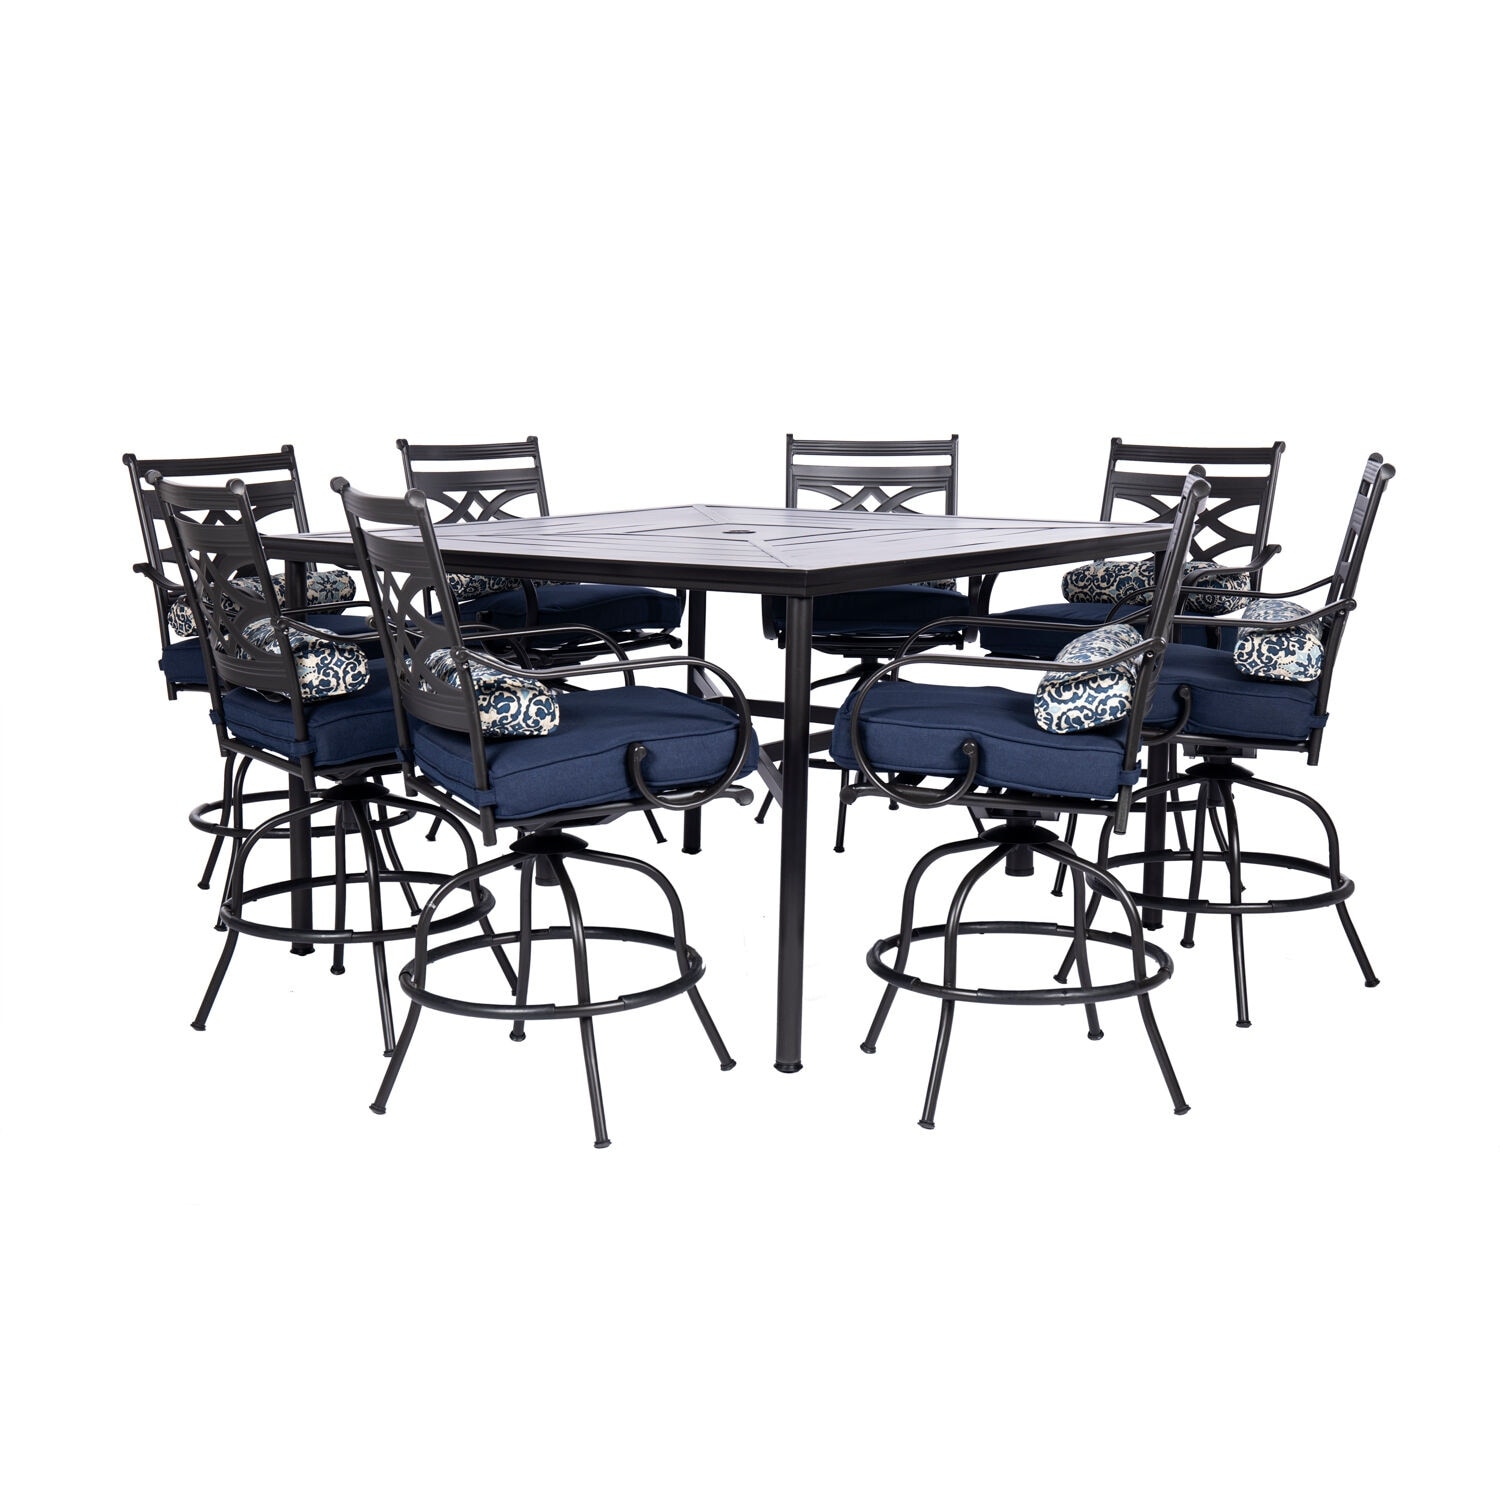 Hanover Montclair 9-piece High-dining Set In Navy Blue With 8 Counter-height Swivel Chairs And 60-inch Square Table